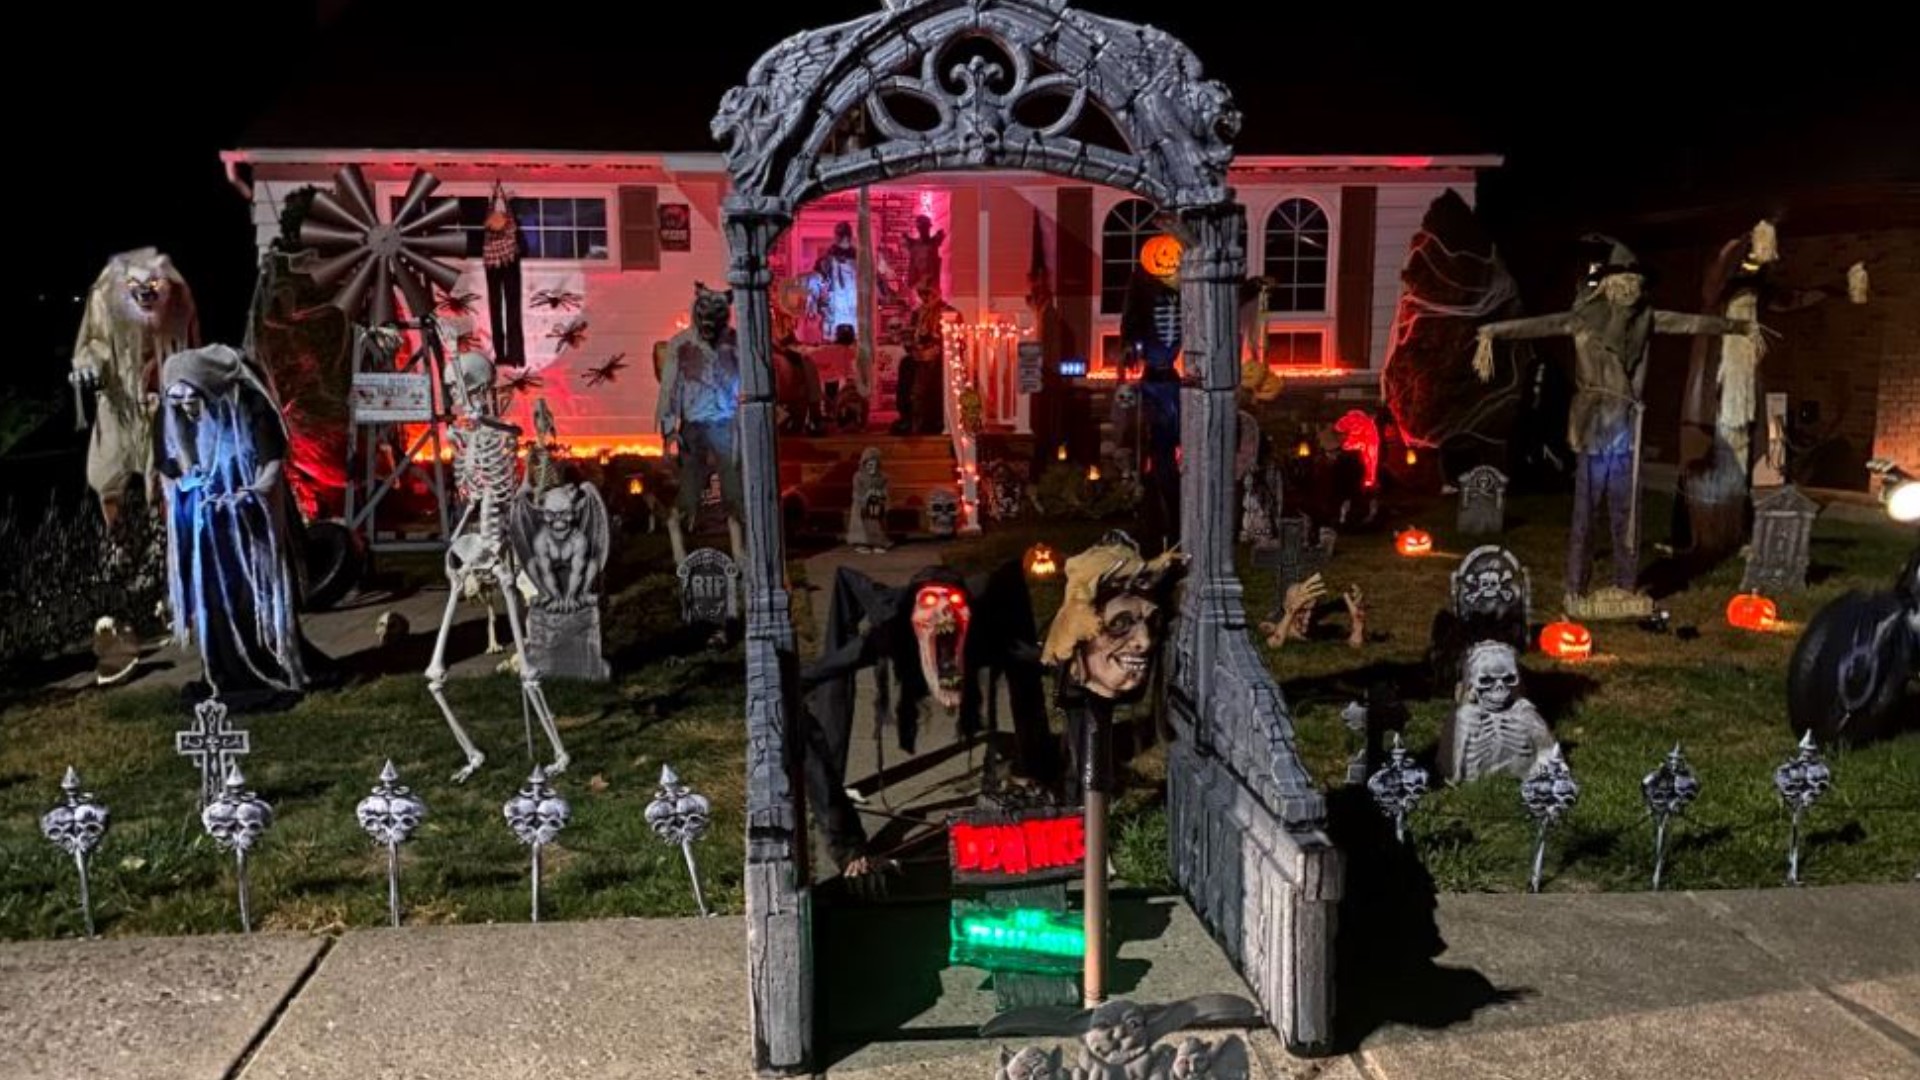 Home décor is hot right now as many start scaring up some fun weeks before Halloween.